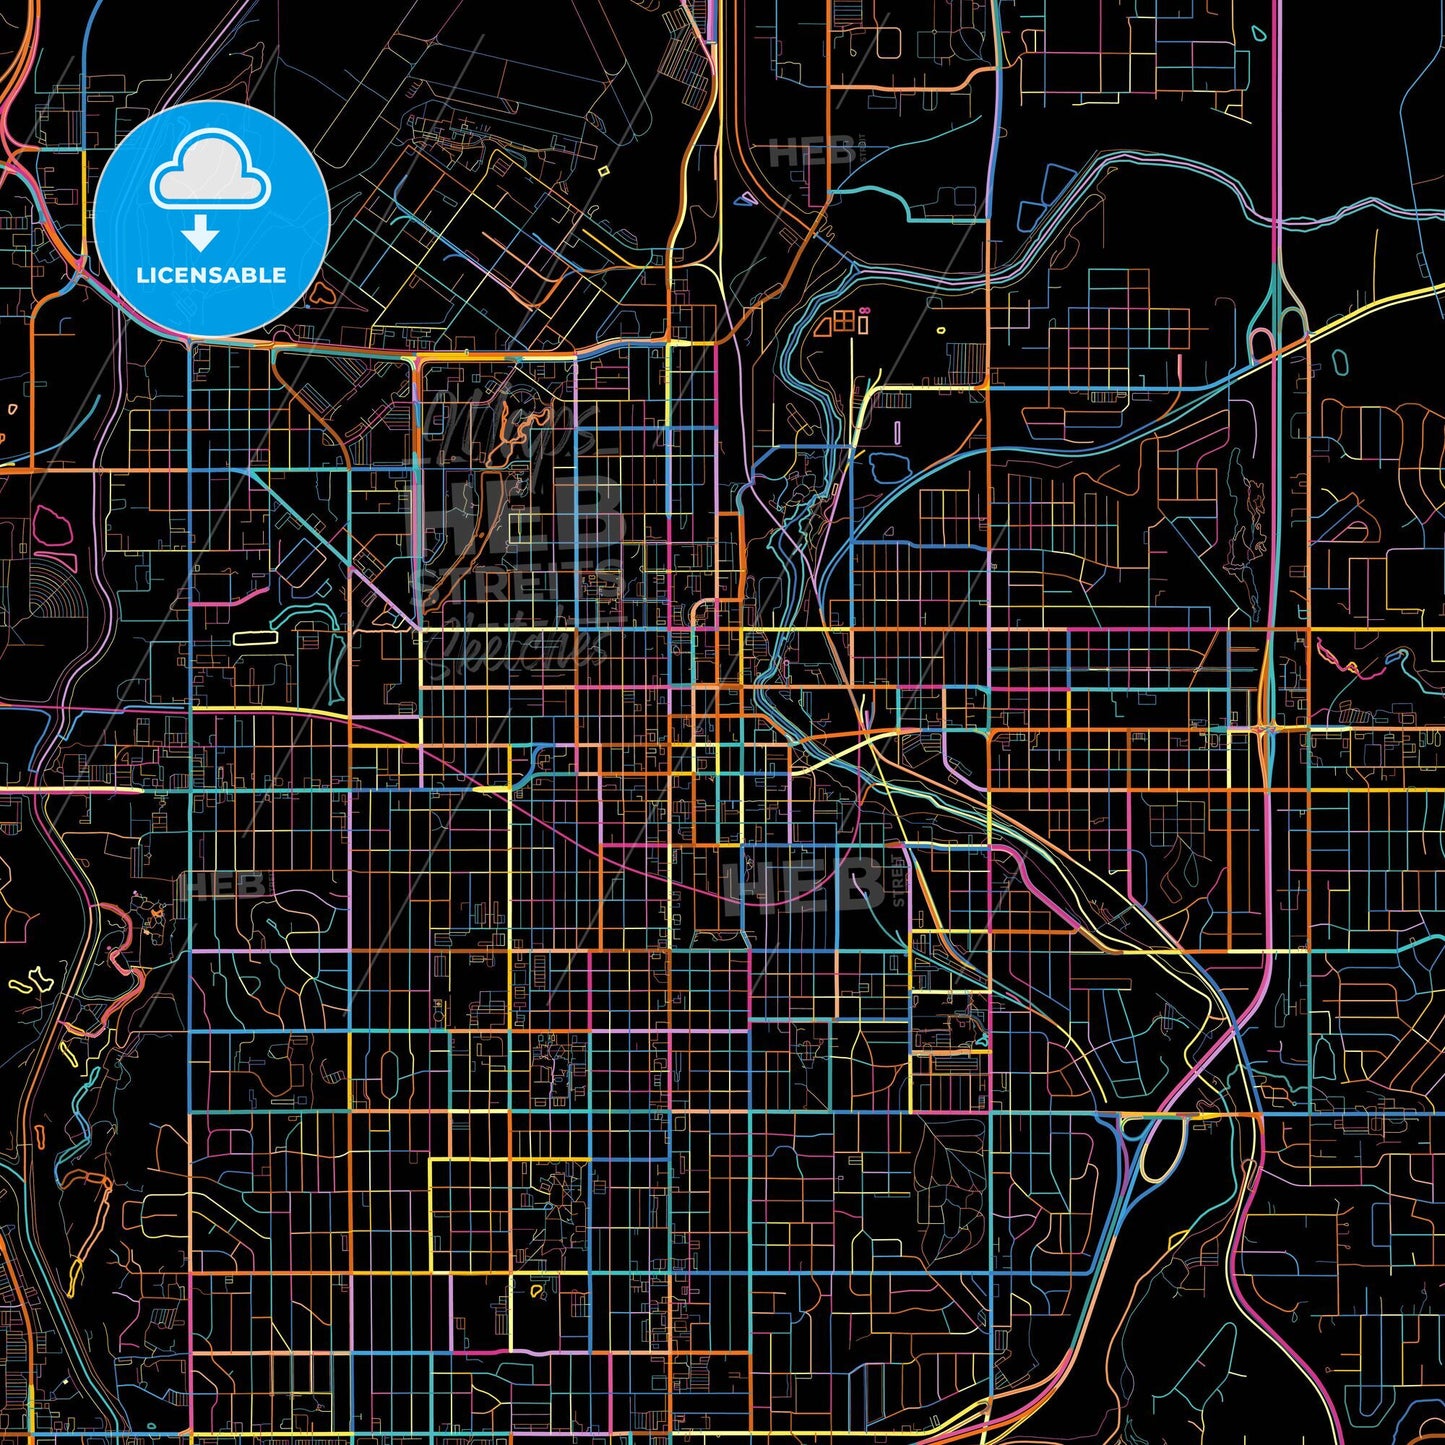 Sioux Falls, South Dakota, United States, colorful city map on black background